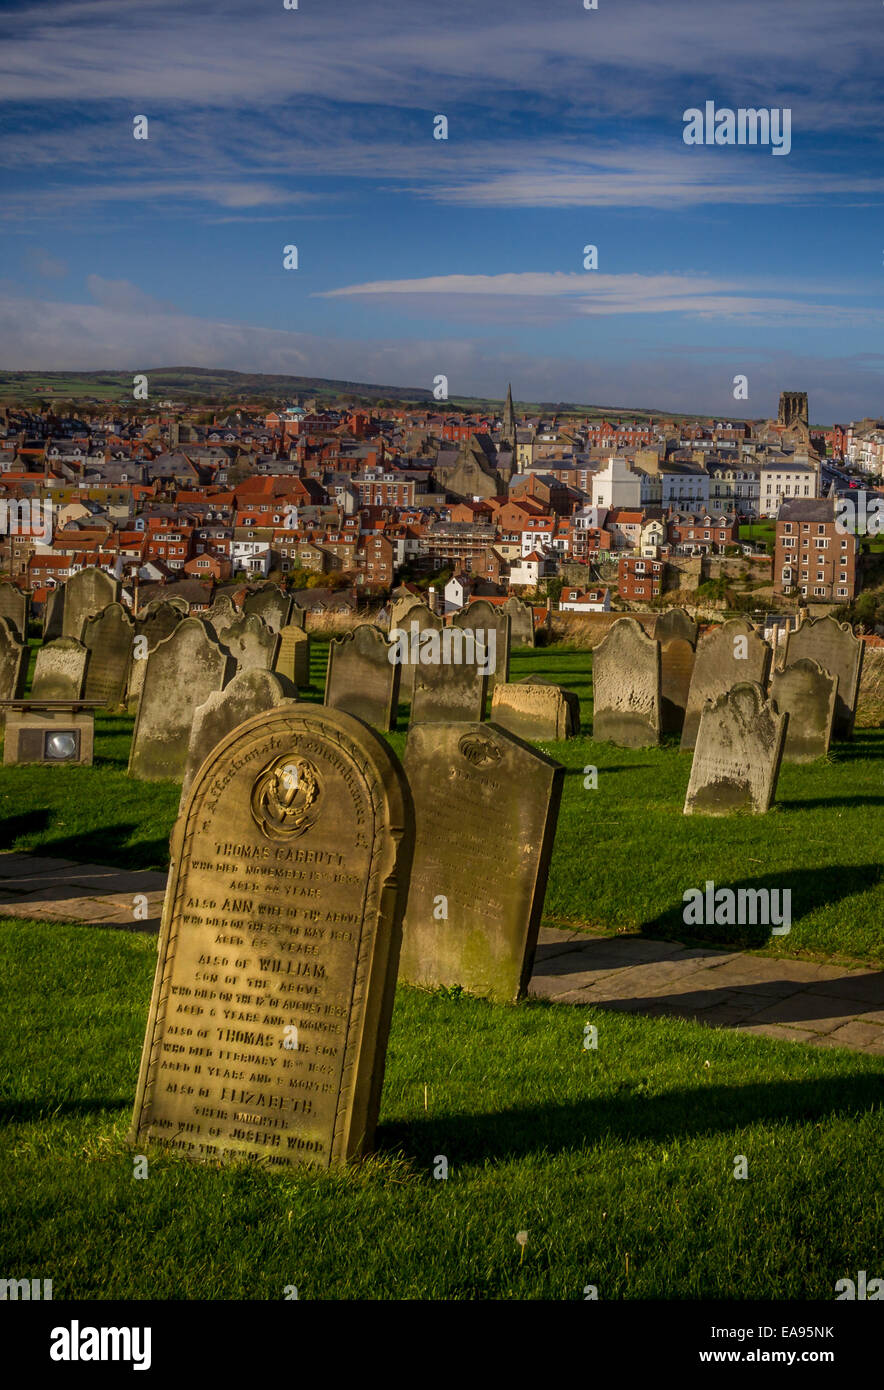 A view of Whitby from the gravestones near Whiby abbey, Yorkshire, UK Stock Photo